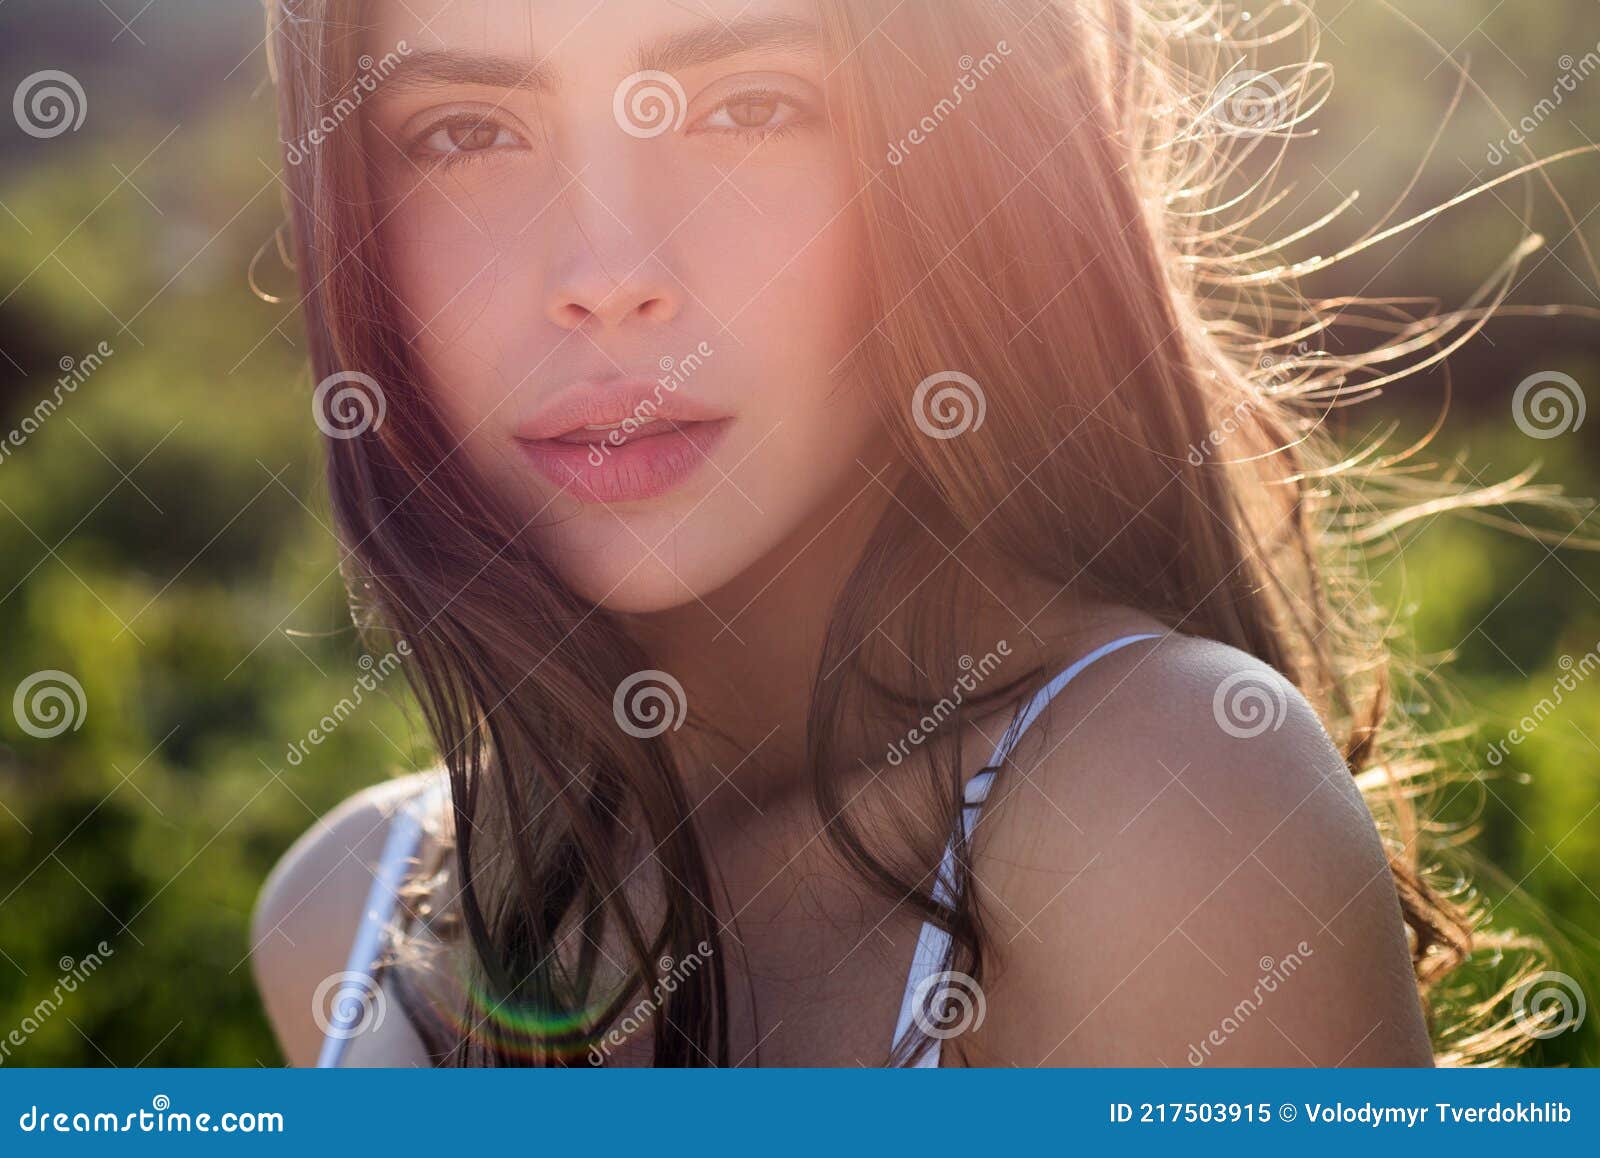 Portrait of Beautiful Model with Natural Nude Make Up. Beauty Girl Face.  Young Sensual Woman Outdoors Portrait Stock Image - Image of elegant, face:  217503915